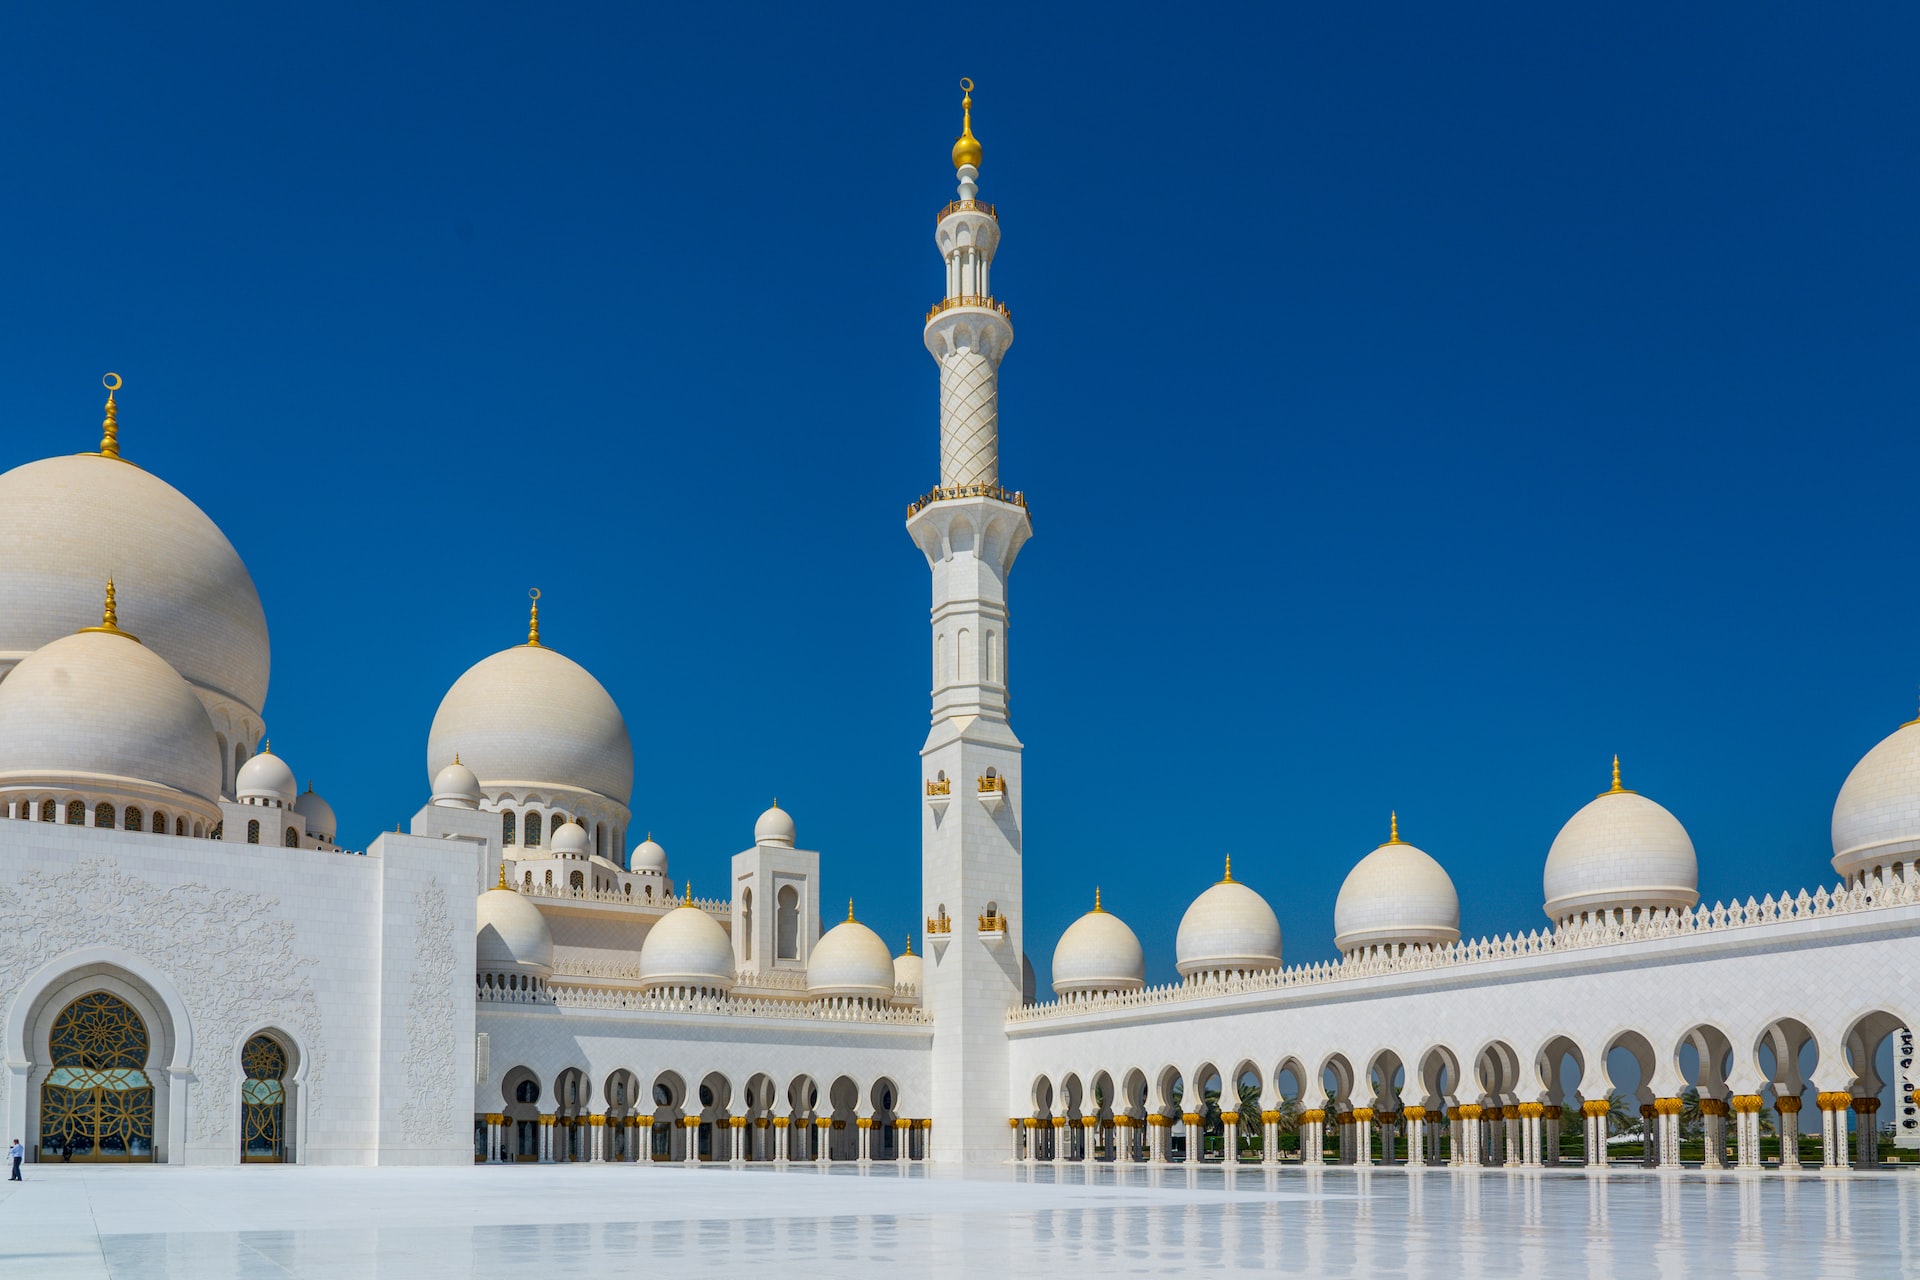 Sheikh Zayed Grand Mosque in Abu Dhabi, white cupolas and minarets against a bright blue sky.